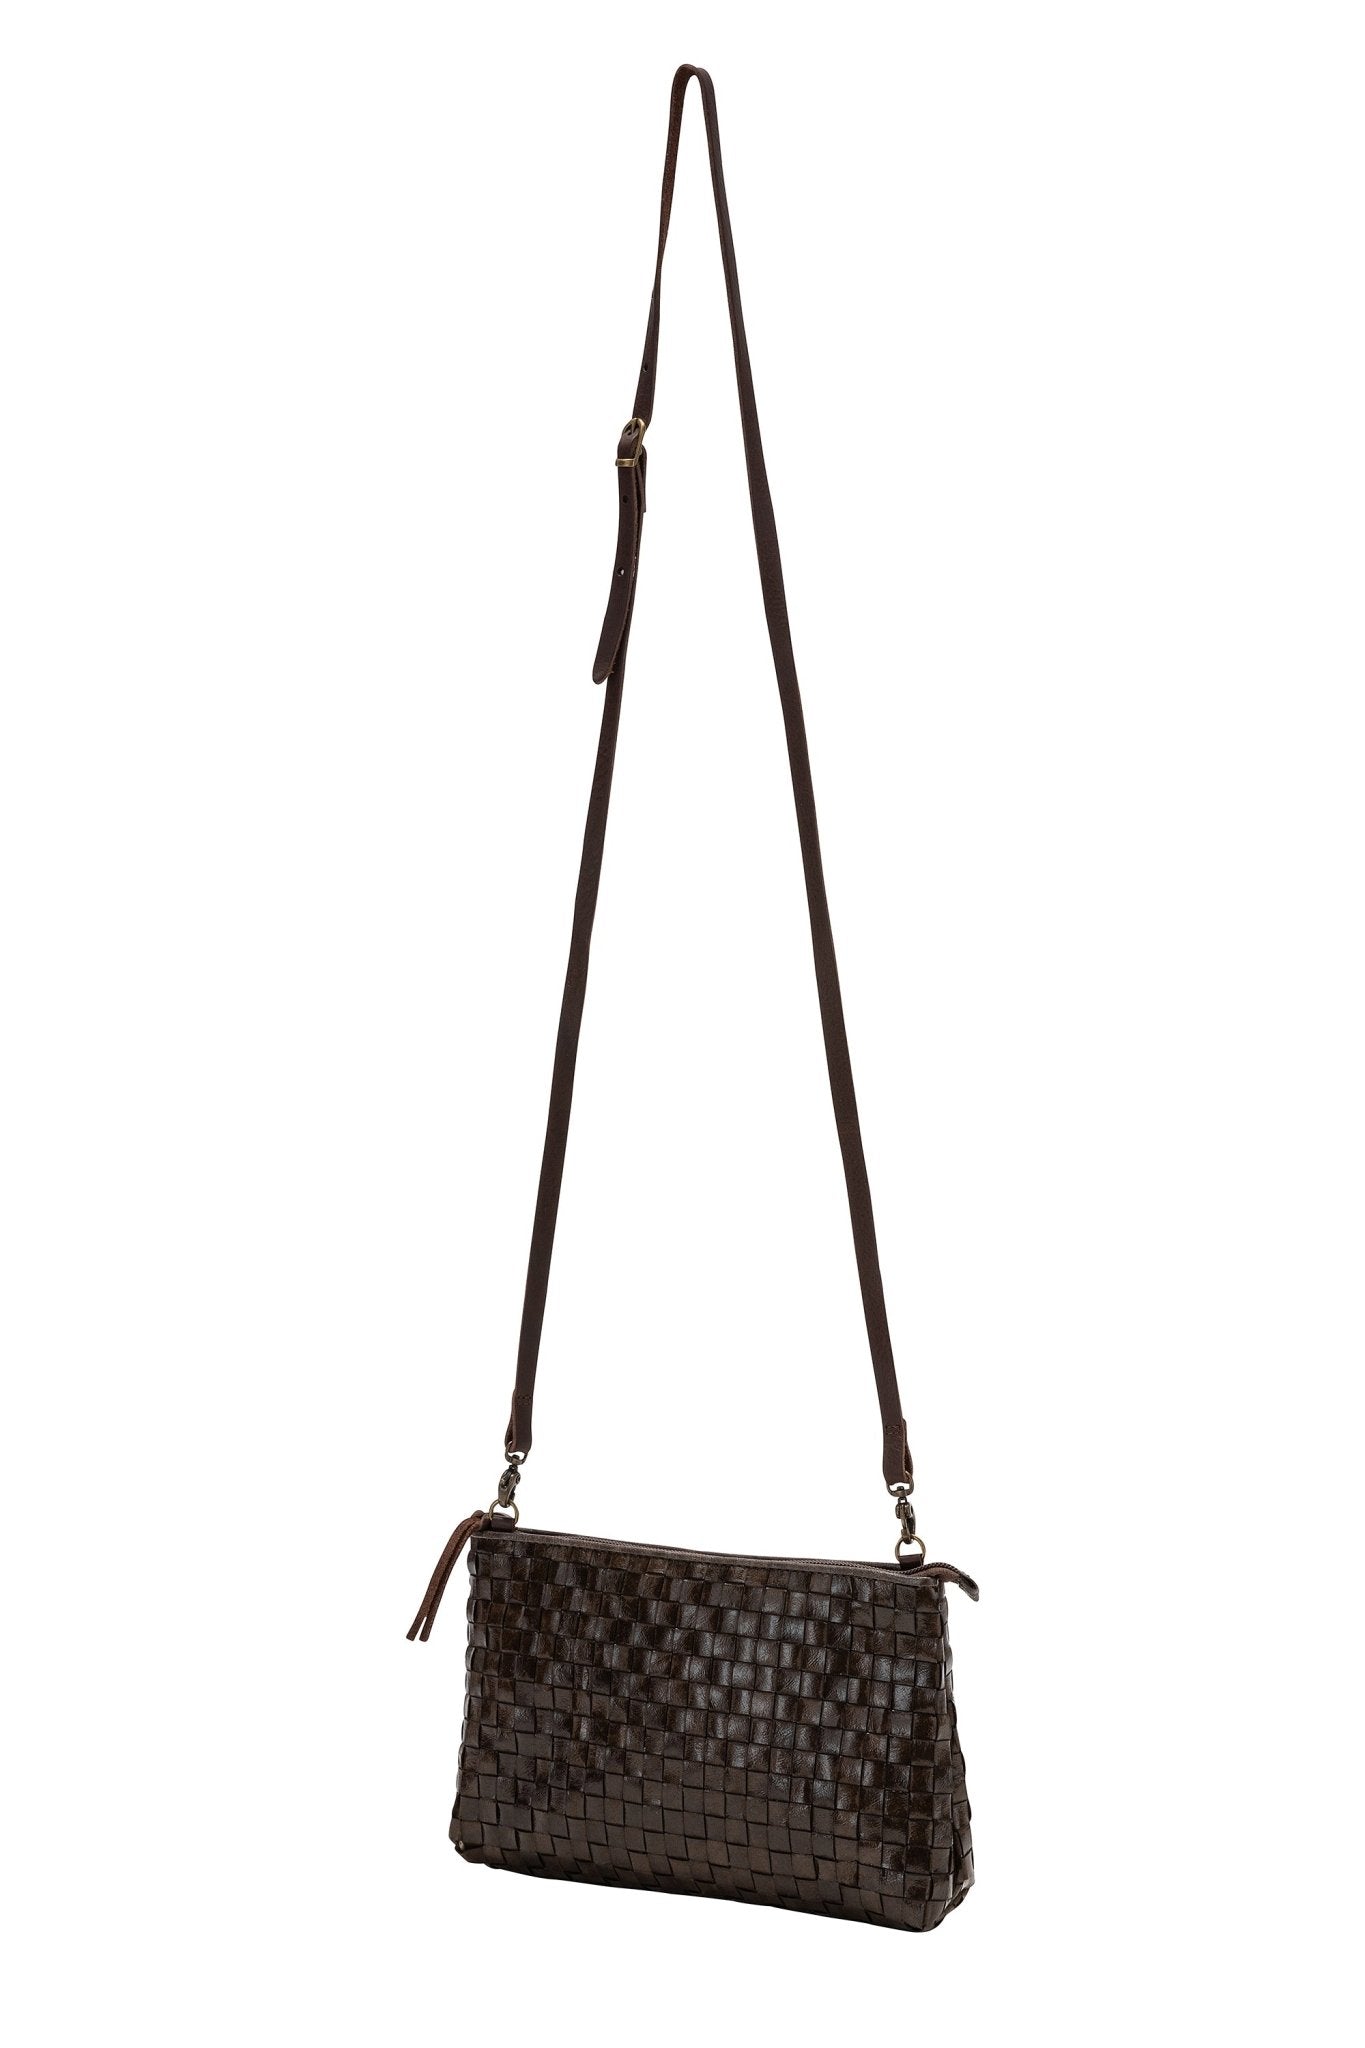 A chocolate brown woven washable paper small zip top handbag is shown with a long brown washable paper strap.